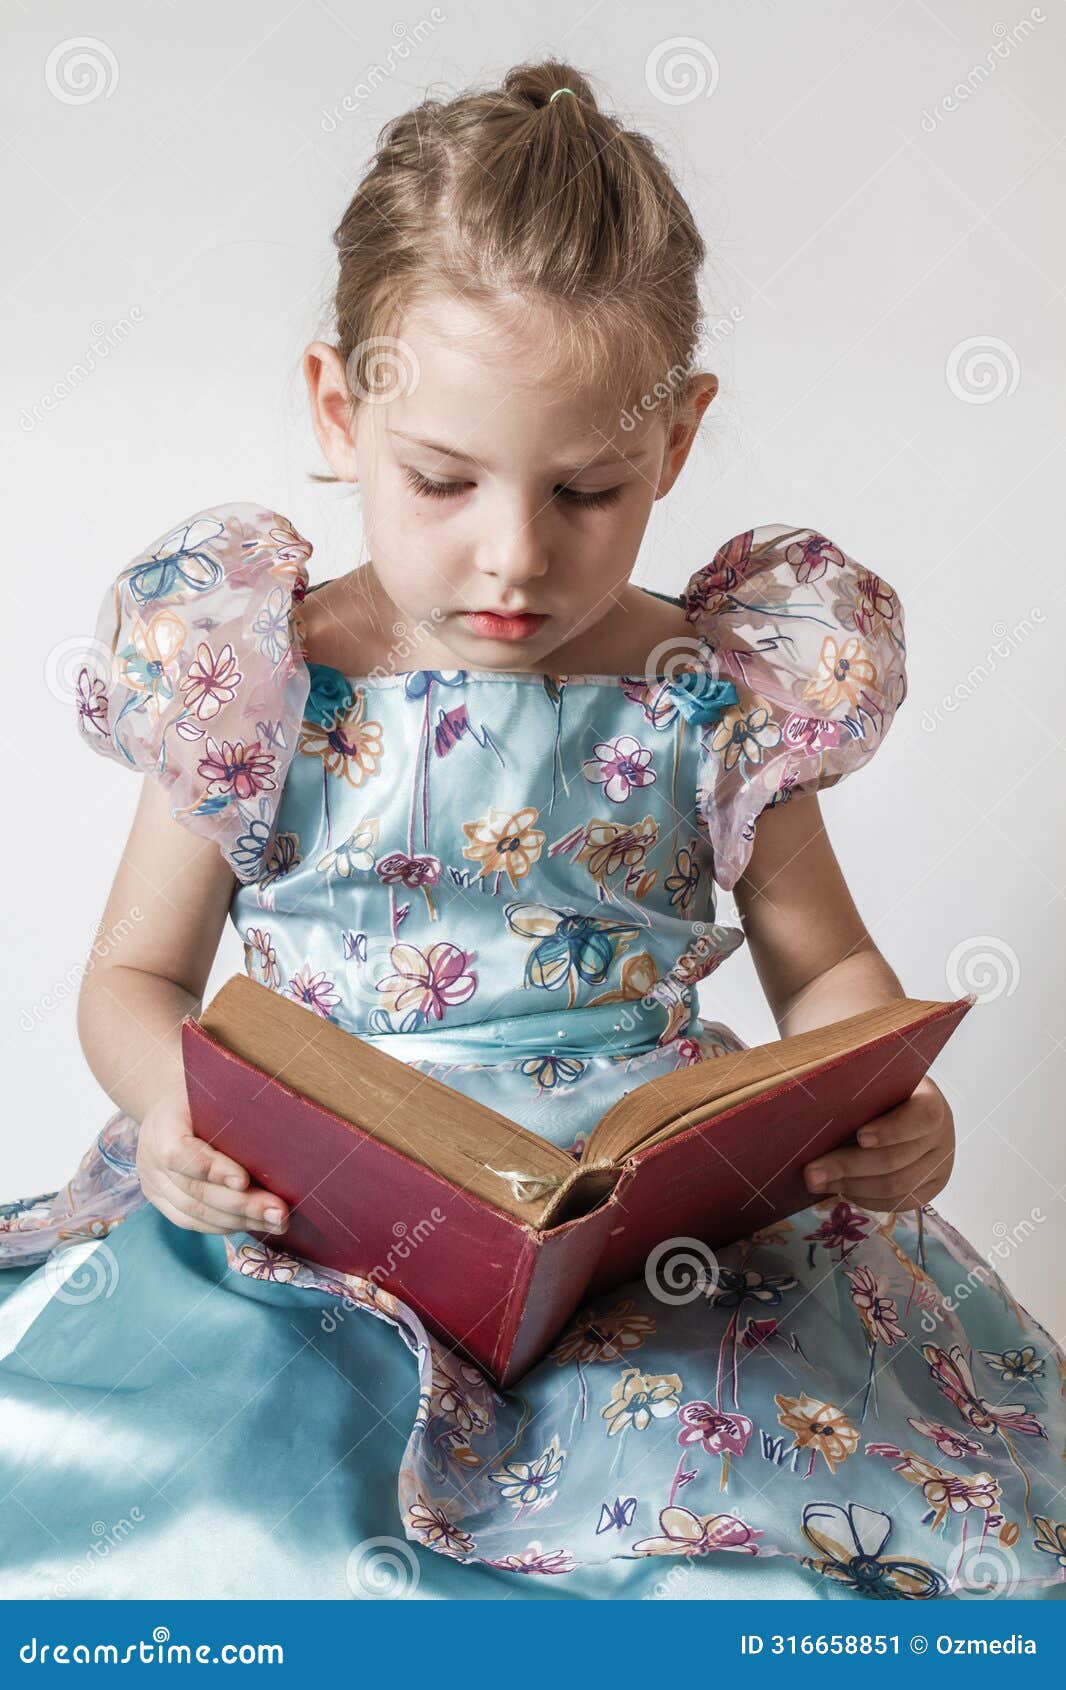 cheerful little girl engrossed in reading, embracing knowledge and education